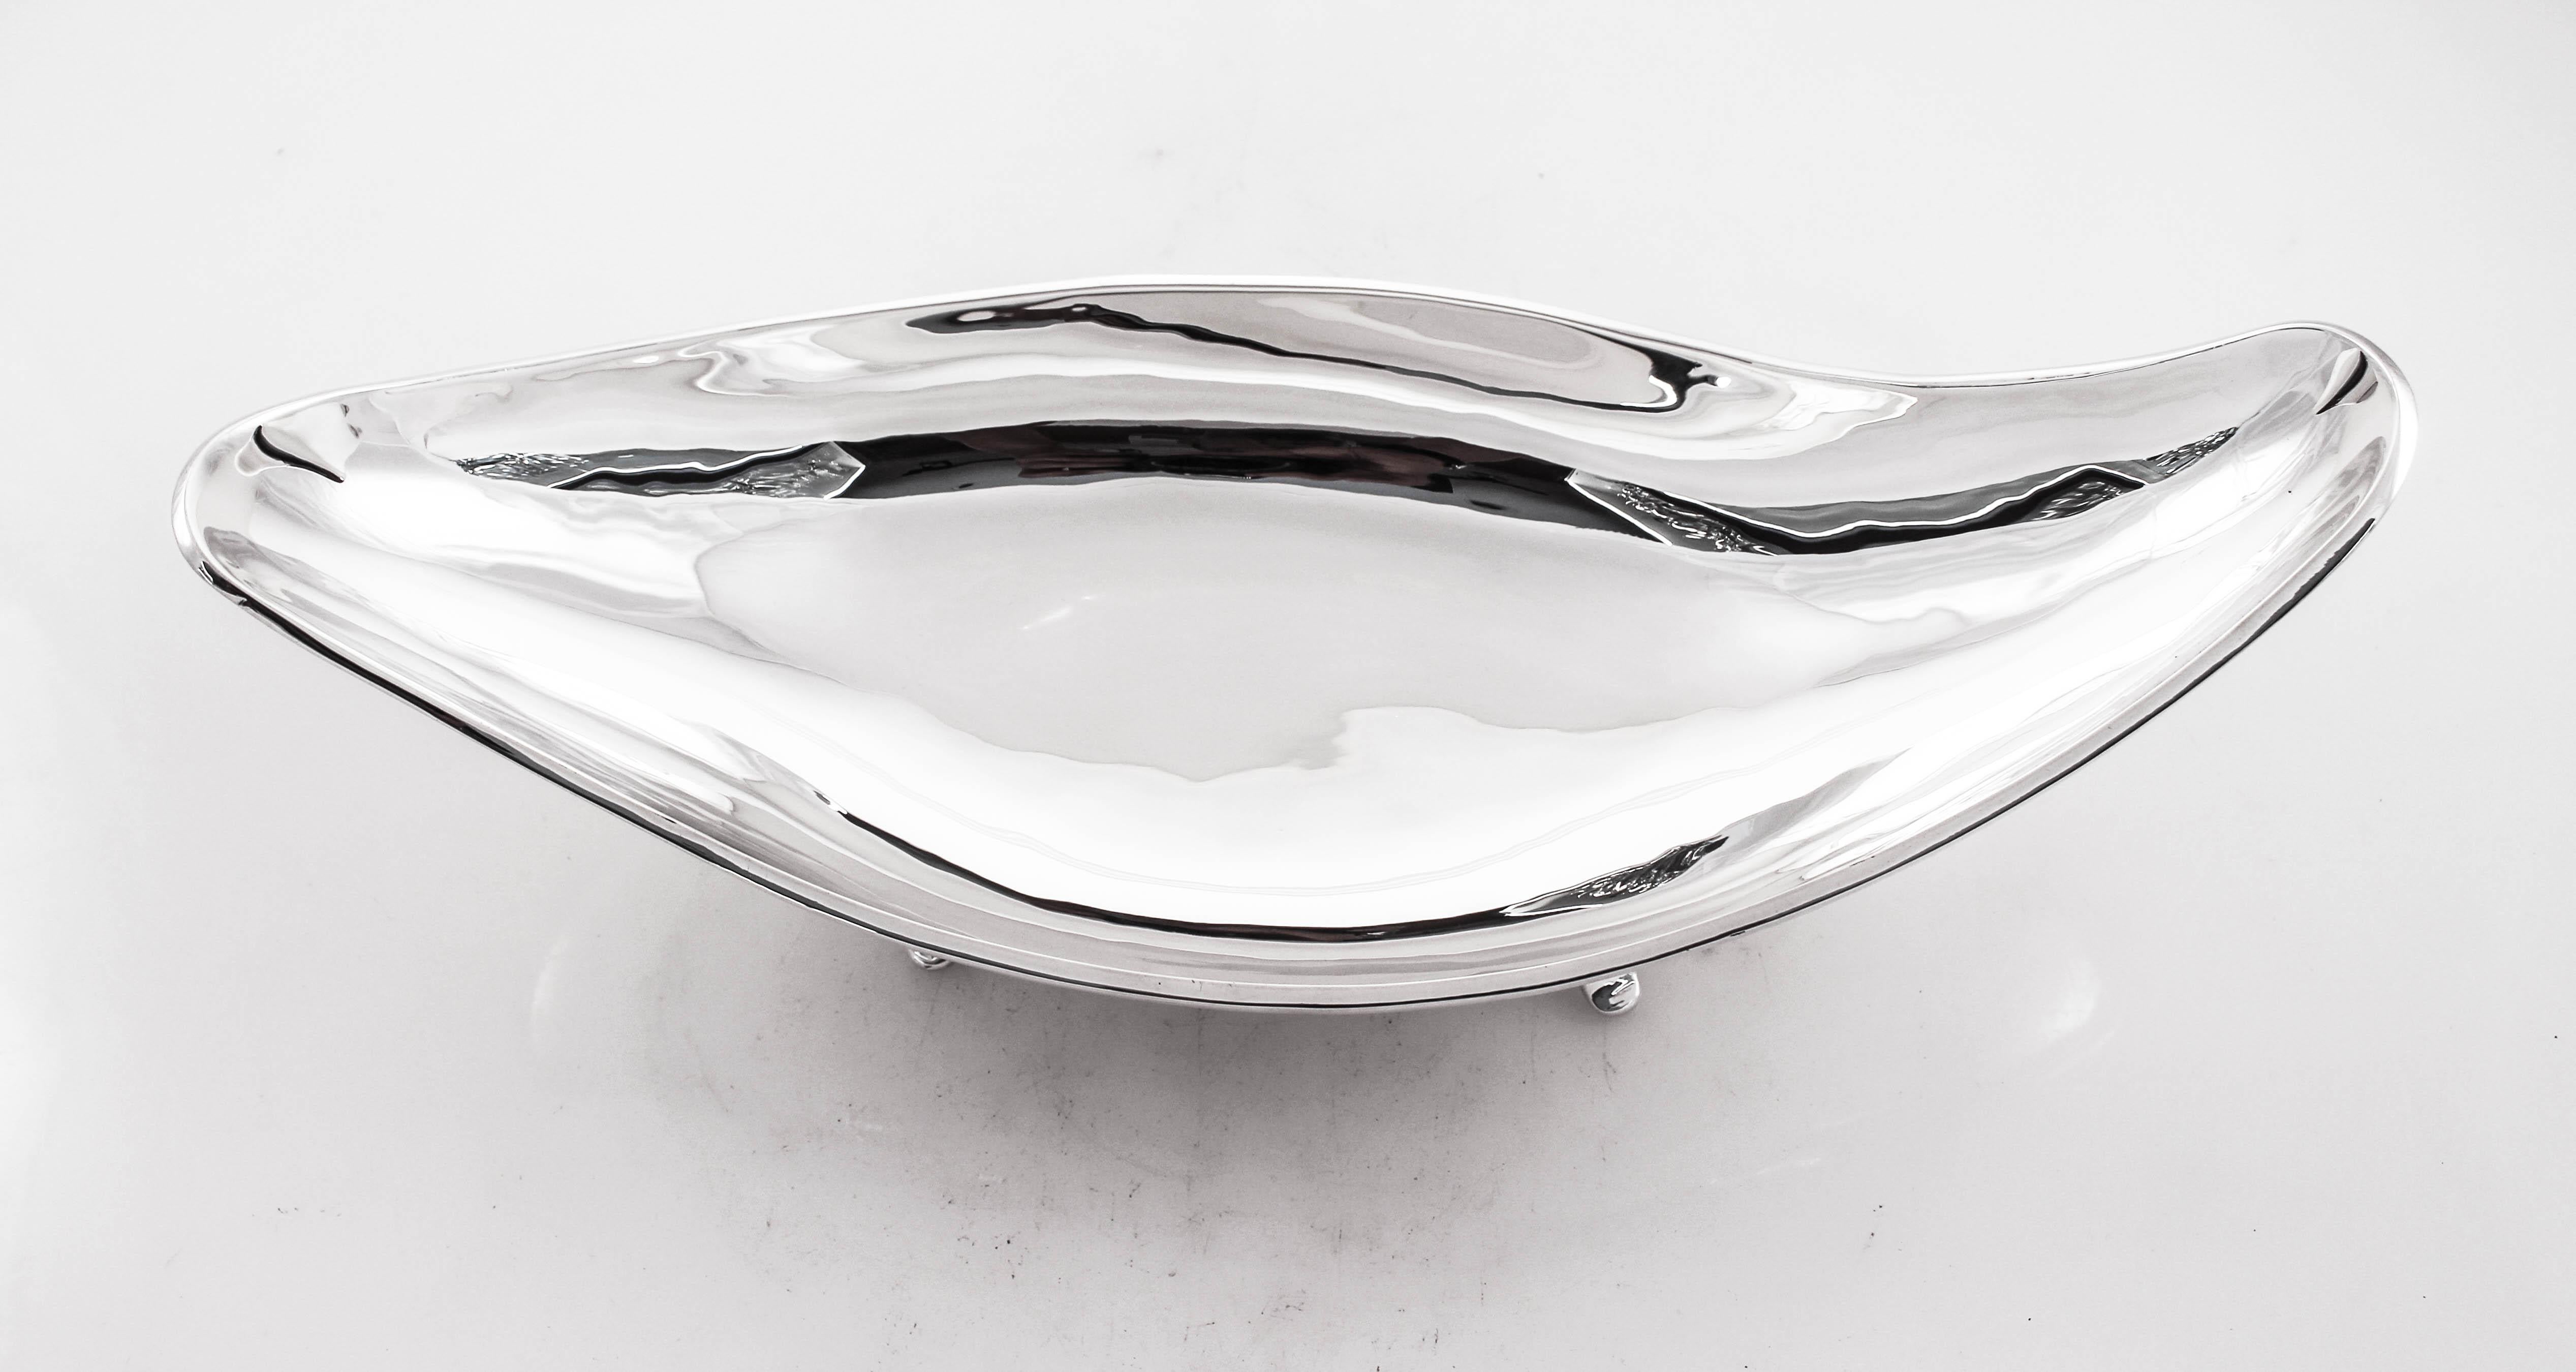 We proudly offer this sterling silver modernism dish from 1960. Midcentury design and the modernist movement mix beautifully together in this piece. It has a fluted shape and flares out on different sides. It stands on four feet and is raised off